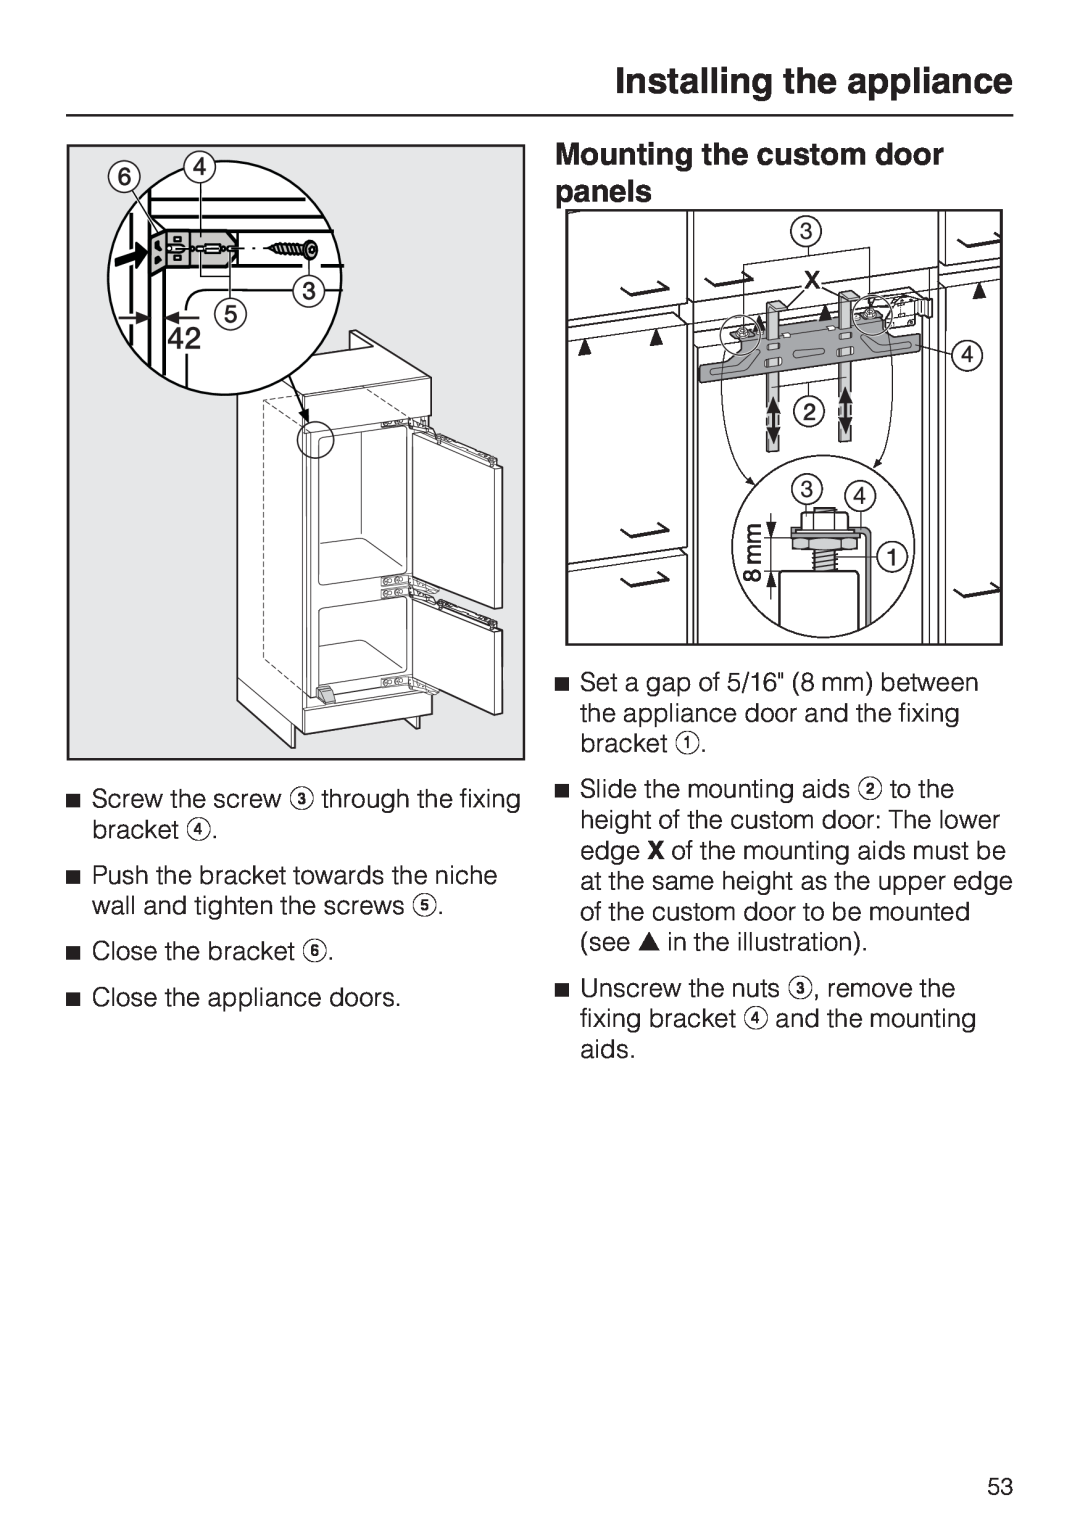 Miele KFN 9755 IDE installation instructions Mounting the custom door panels, Installing the appliance 